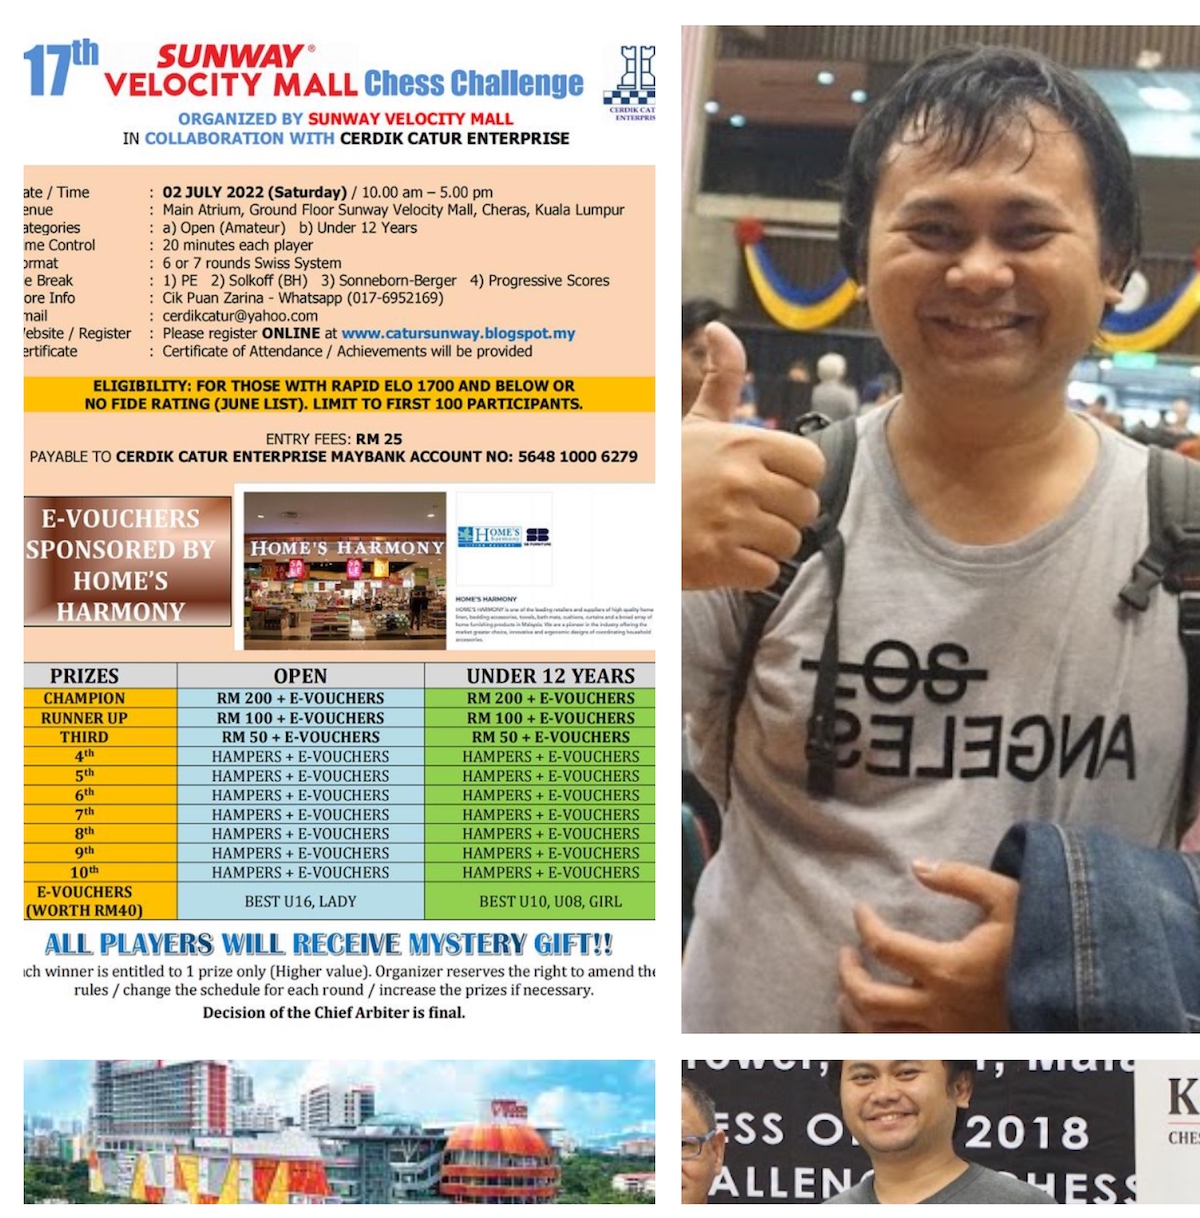 17th SUNWAY VELOCITY CHESS CHALLENGE  - OPEN AMATEUR